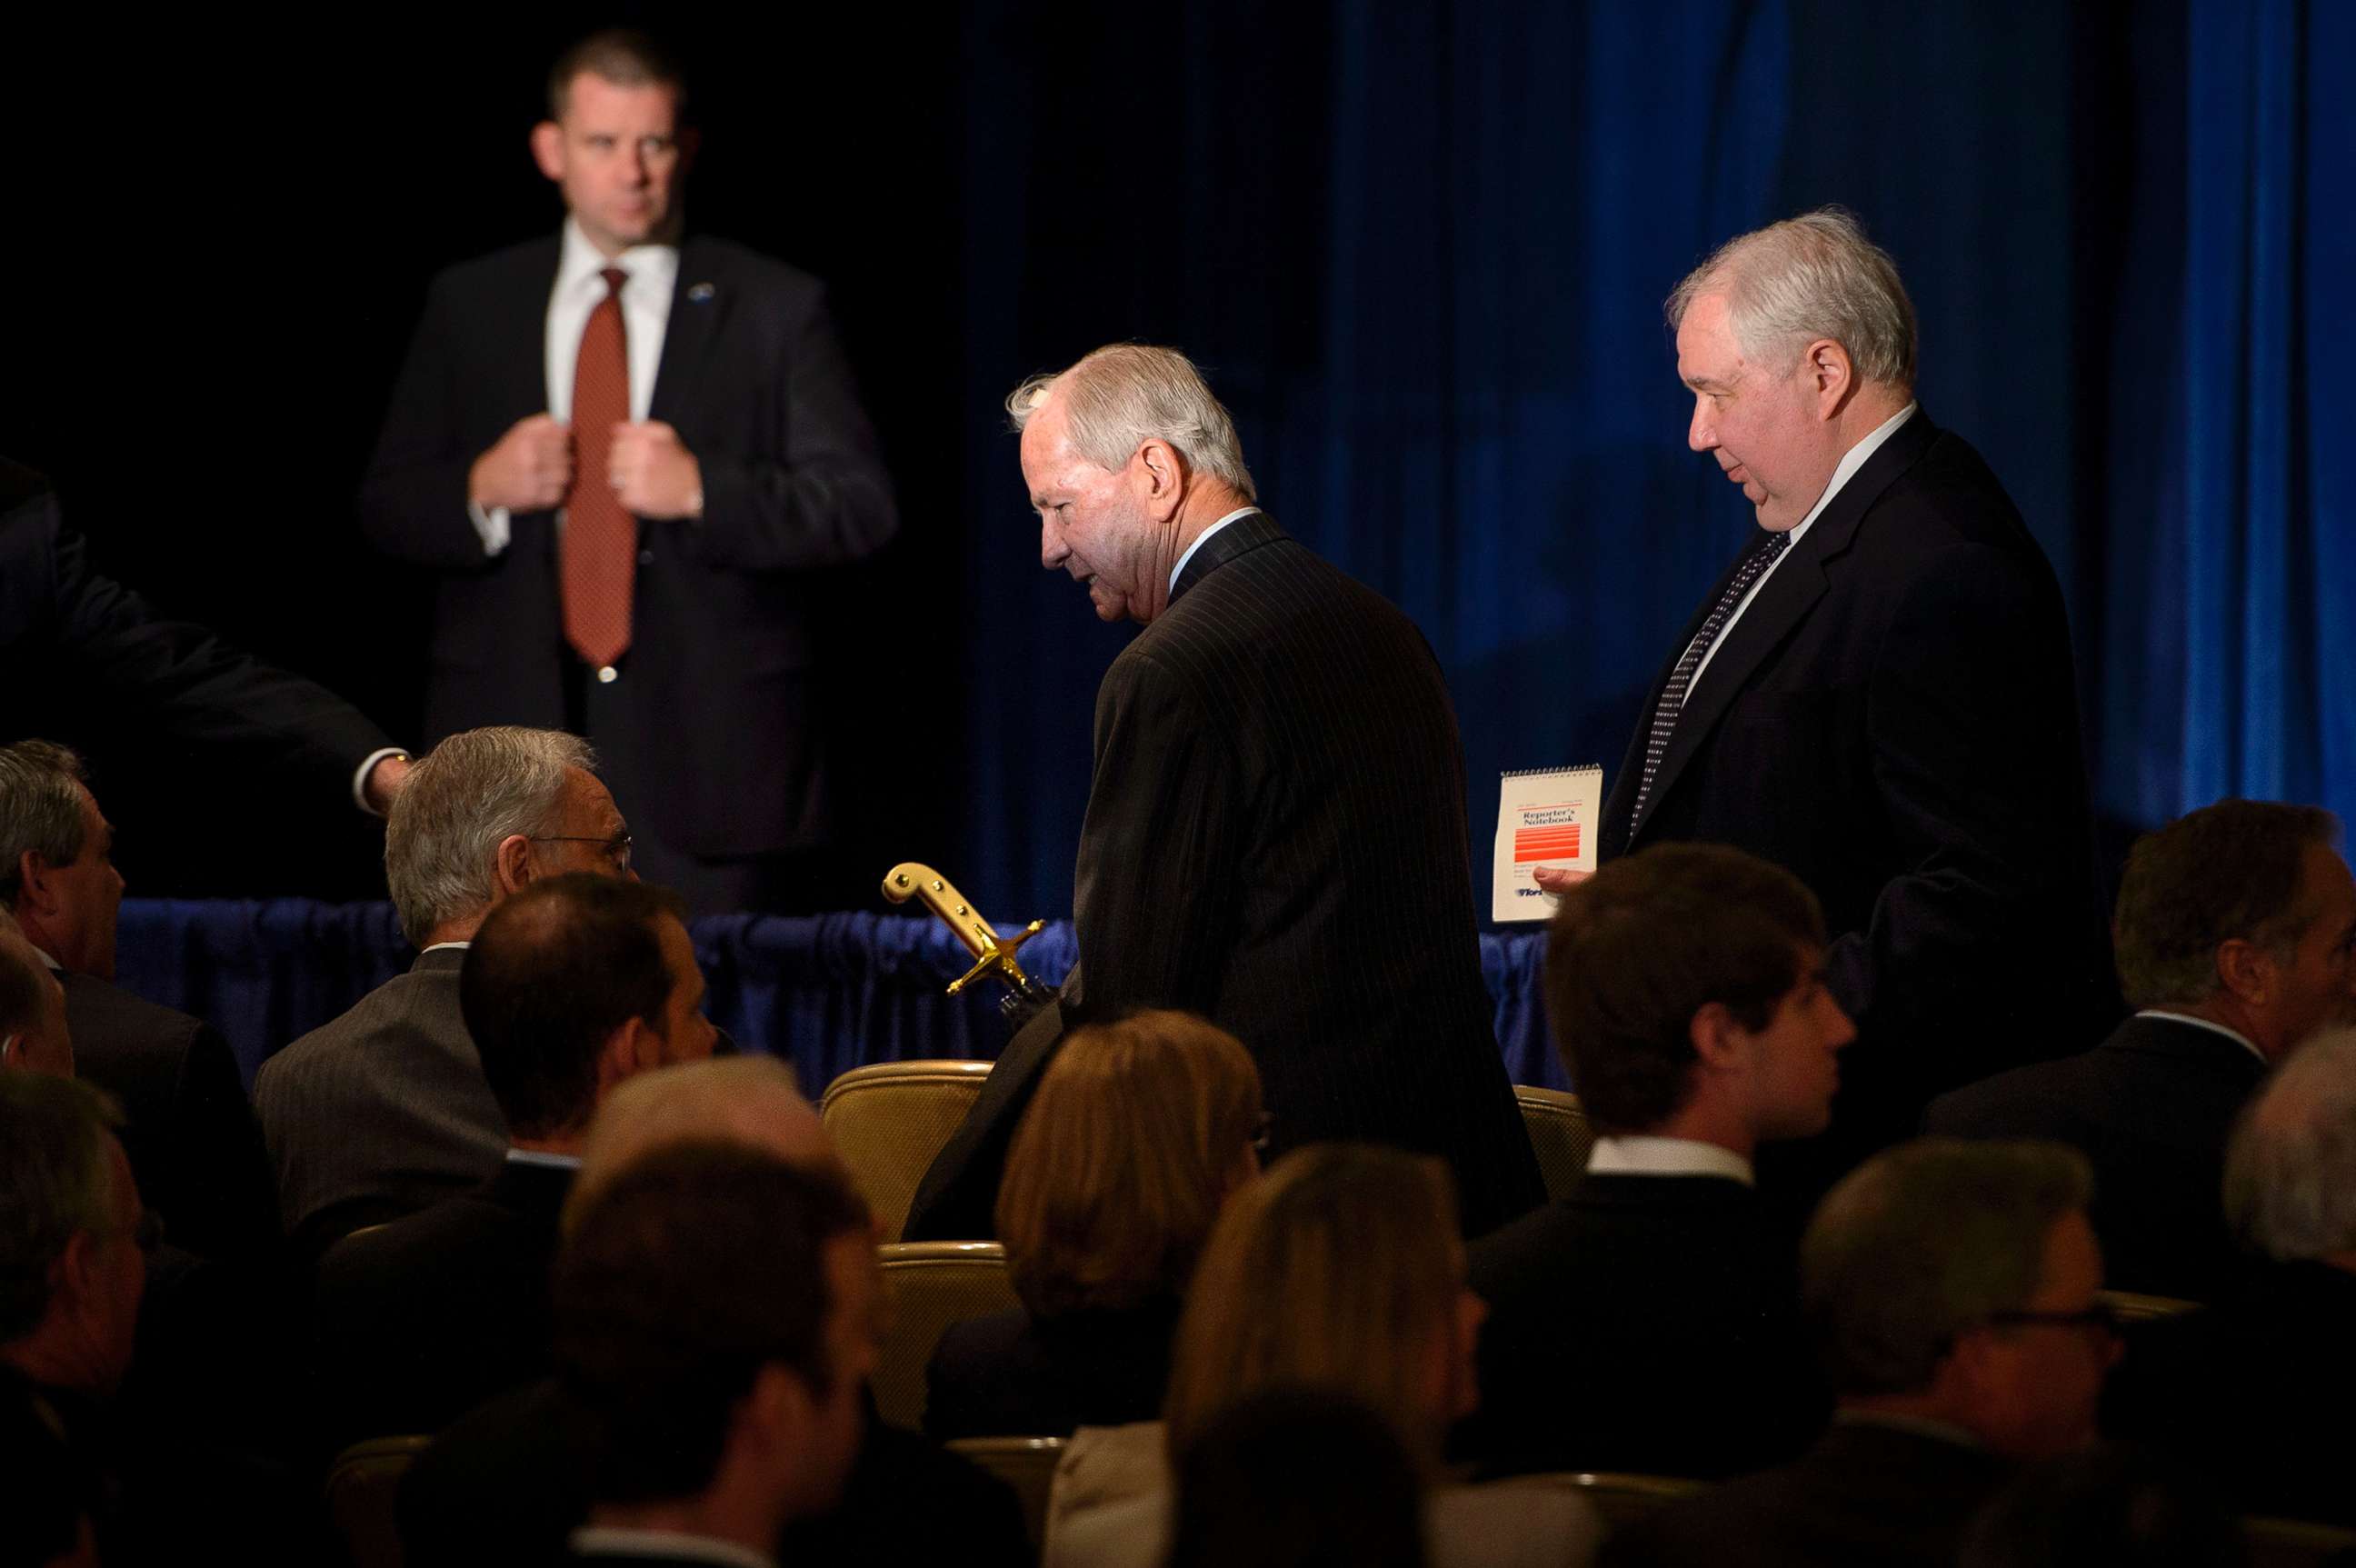 PHOTO: Former National Security Advisor Robert Carl McFarlane and Russian Ambassador to the U.S. Sergey Kislyak,right, arrive for a speech on foreign policy by Donald Trump at the Mayflower Hotel in Washington, D.C.,  April 27, 2016.